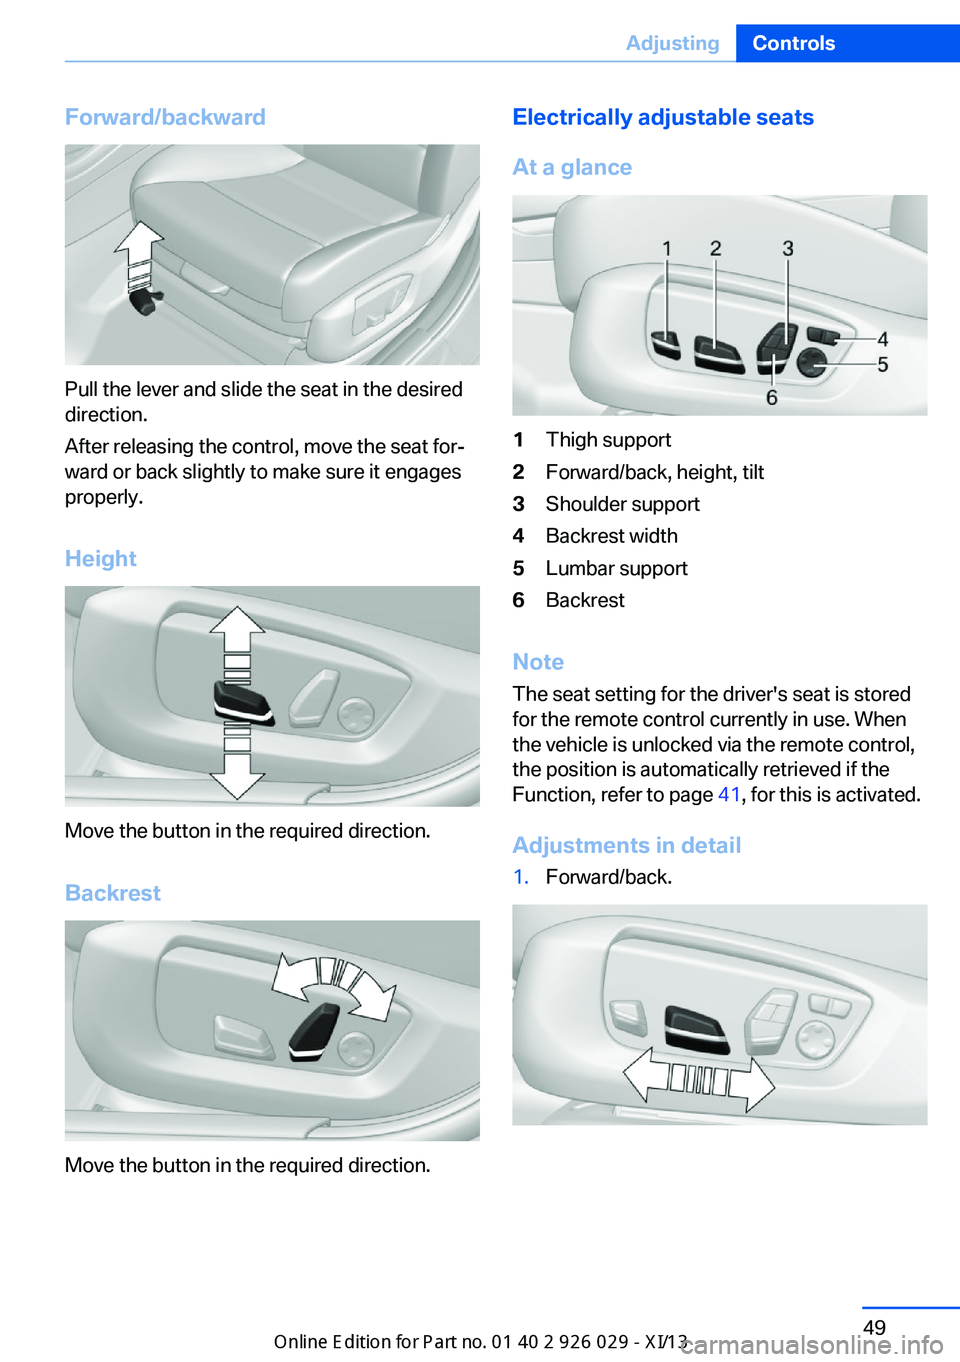 BMW 5 SERIES 2013 F10 Owners Manual Forward/backward
Pull the lever and slide the seat in the desired
direction.
After releasing the control, move the seat for‐
ward or back slightly to make sure it engages
properly.
Height
Move the b